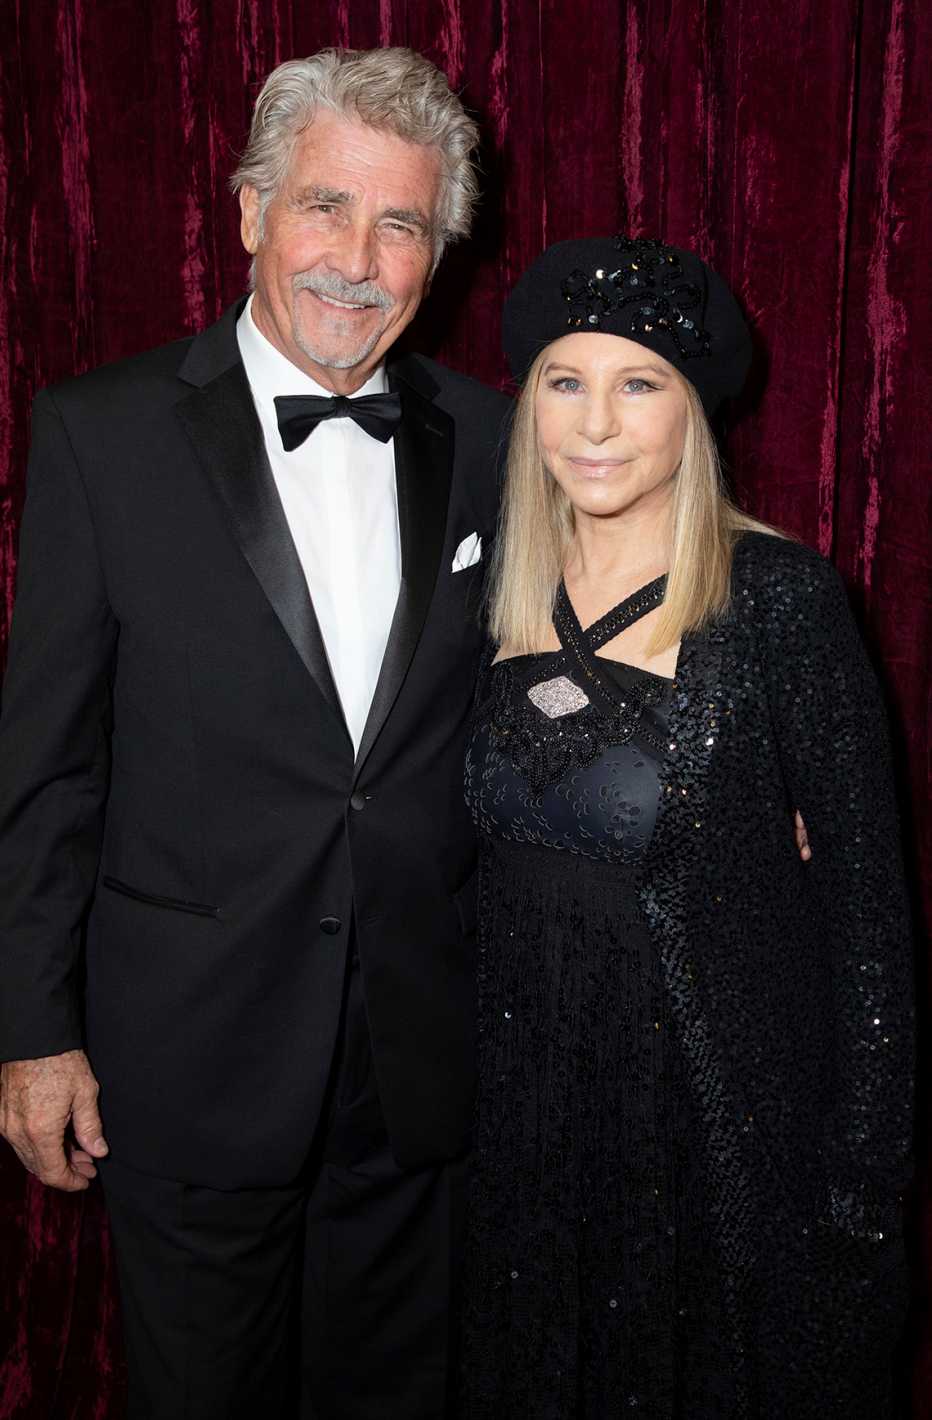 James Brolin and Barbra Streisand at the 91st Academy Awards